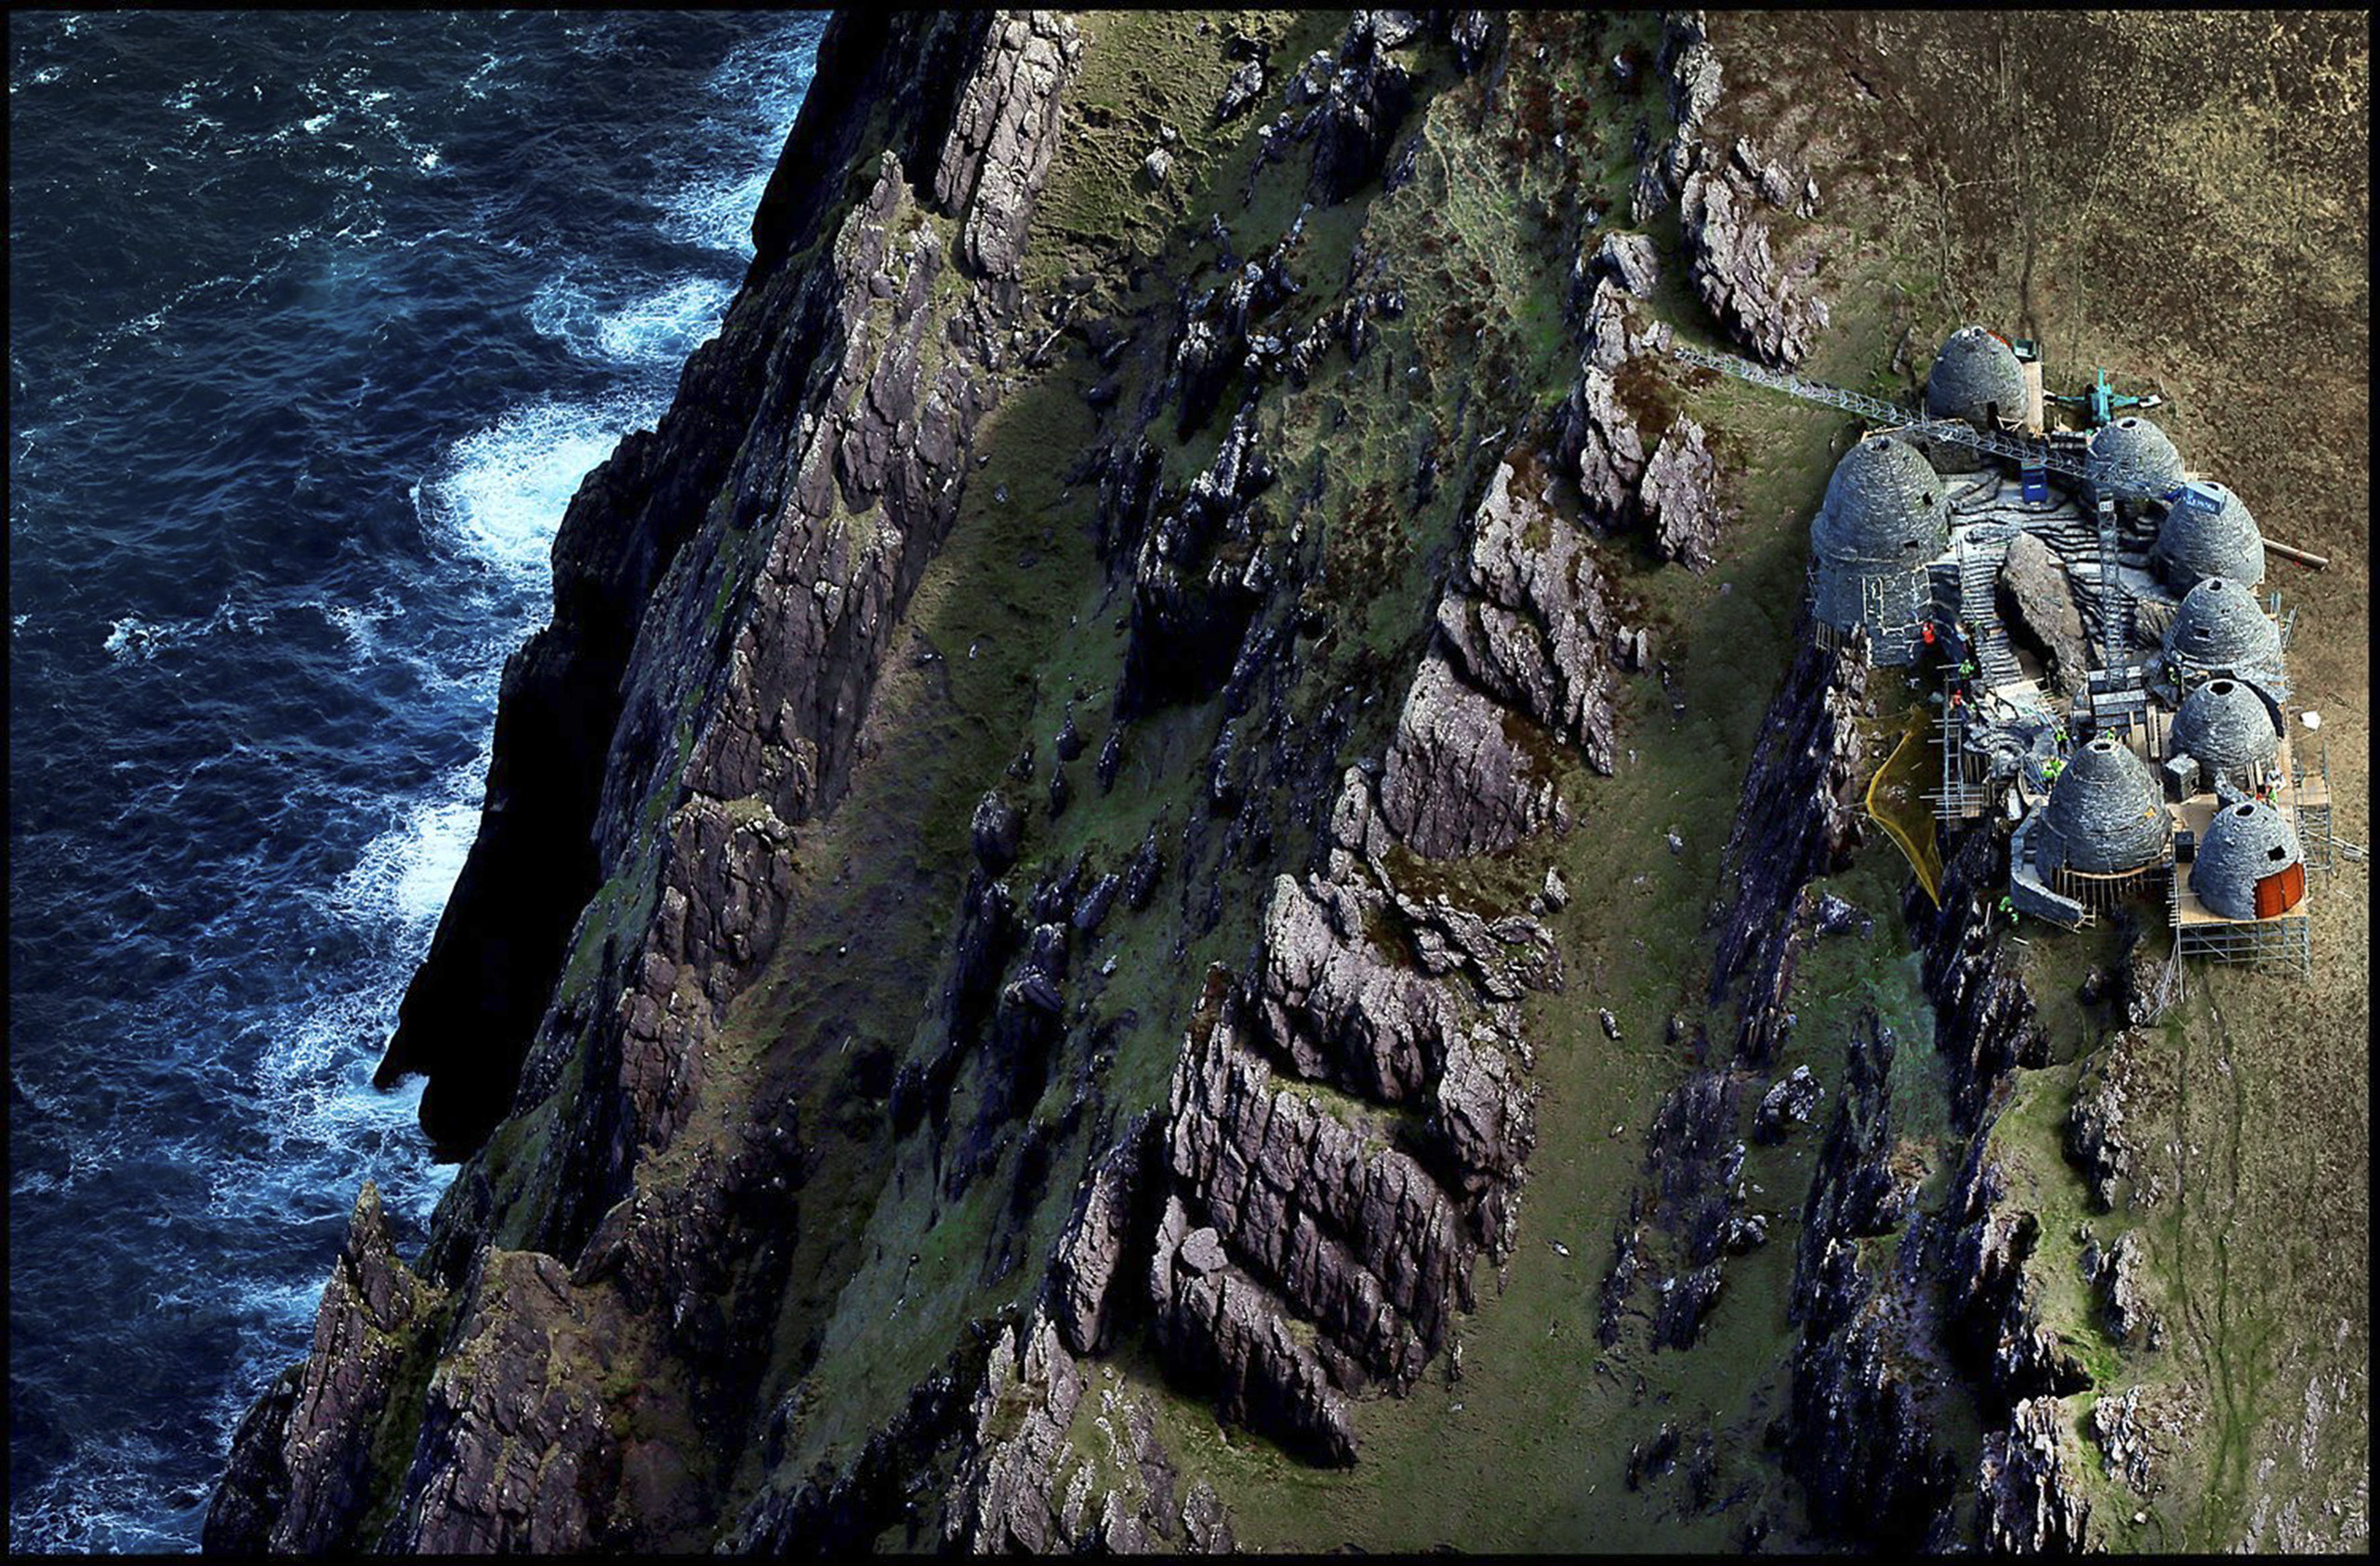 Exclusive pictures of Jedi Temple film set under construction at Ceann Sibeal in Kerry, Ireland for Star Wars Episode VIII.